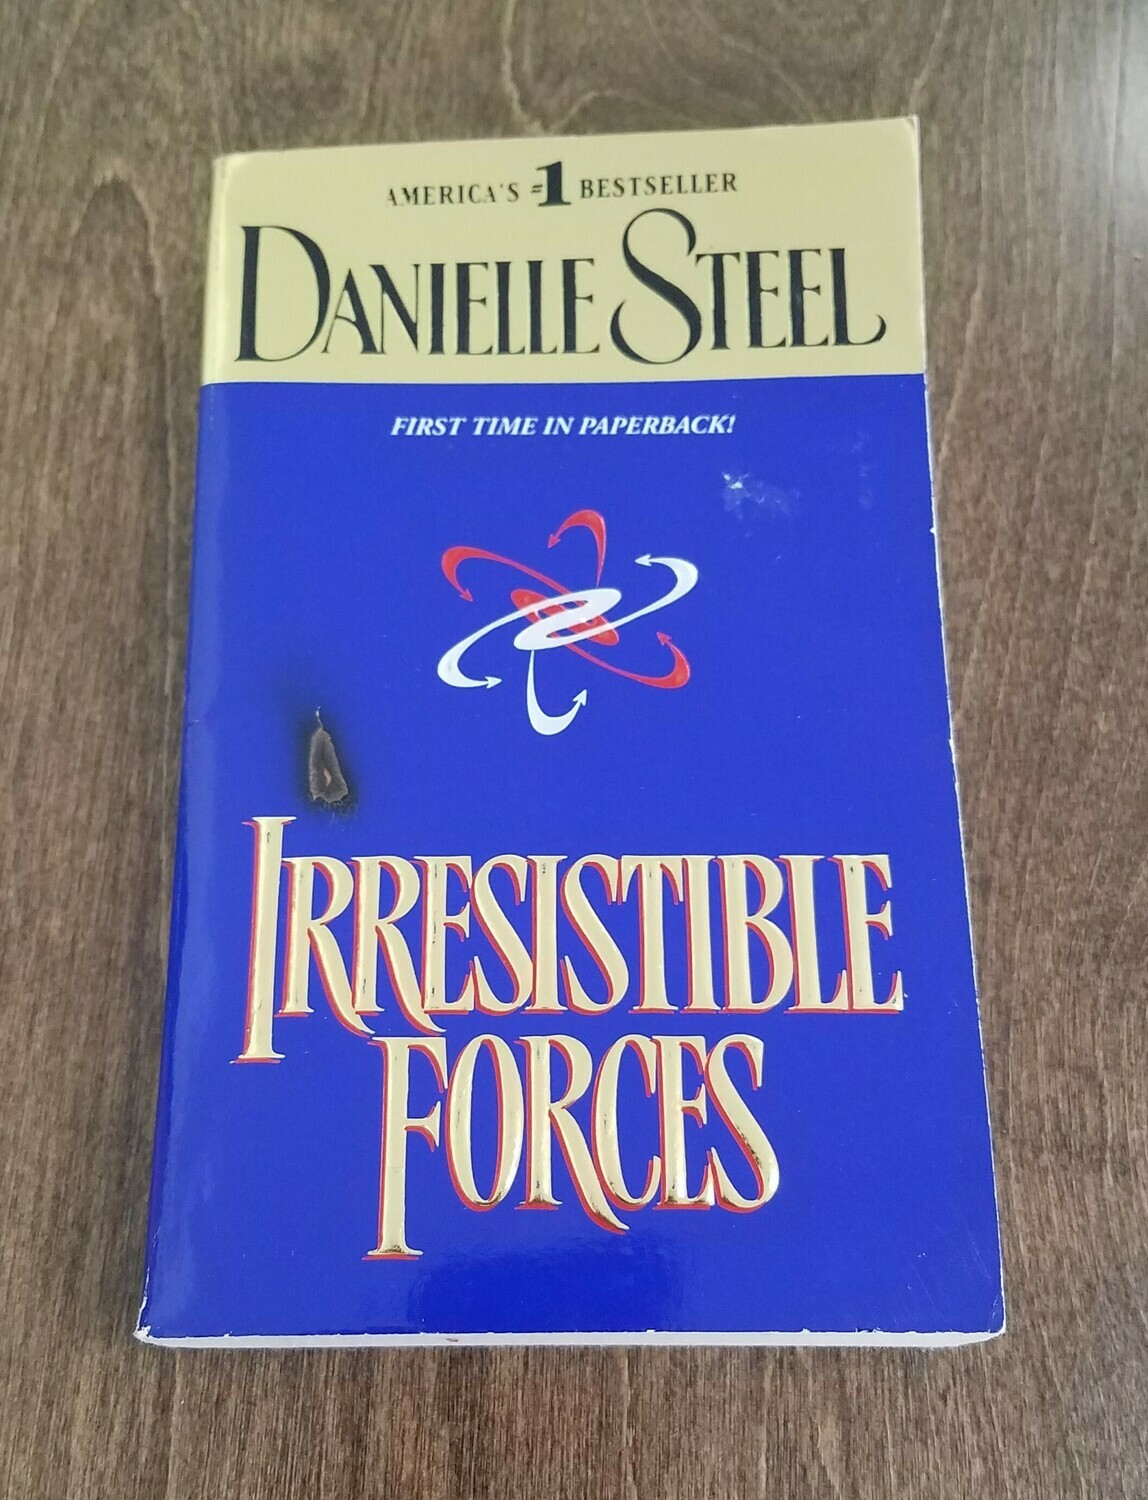 Irresistible Forces by Danielle Steel